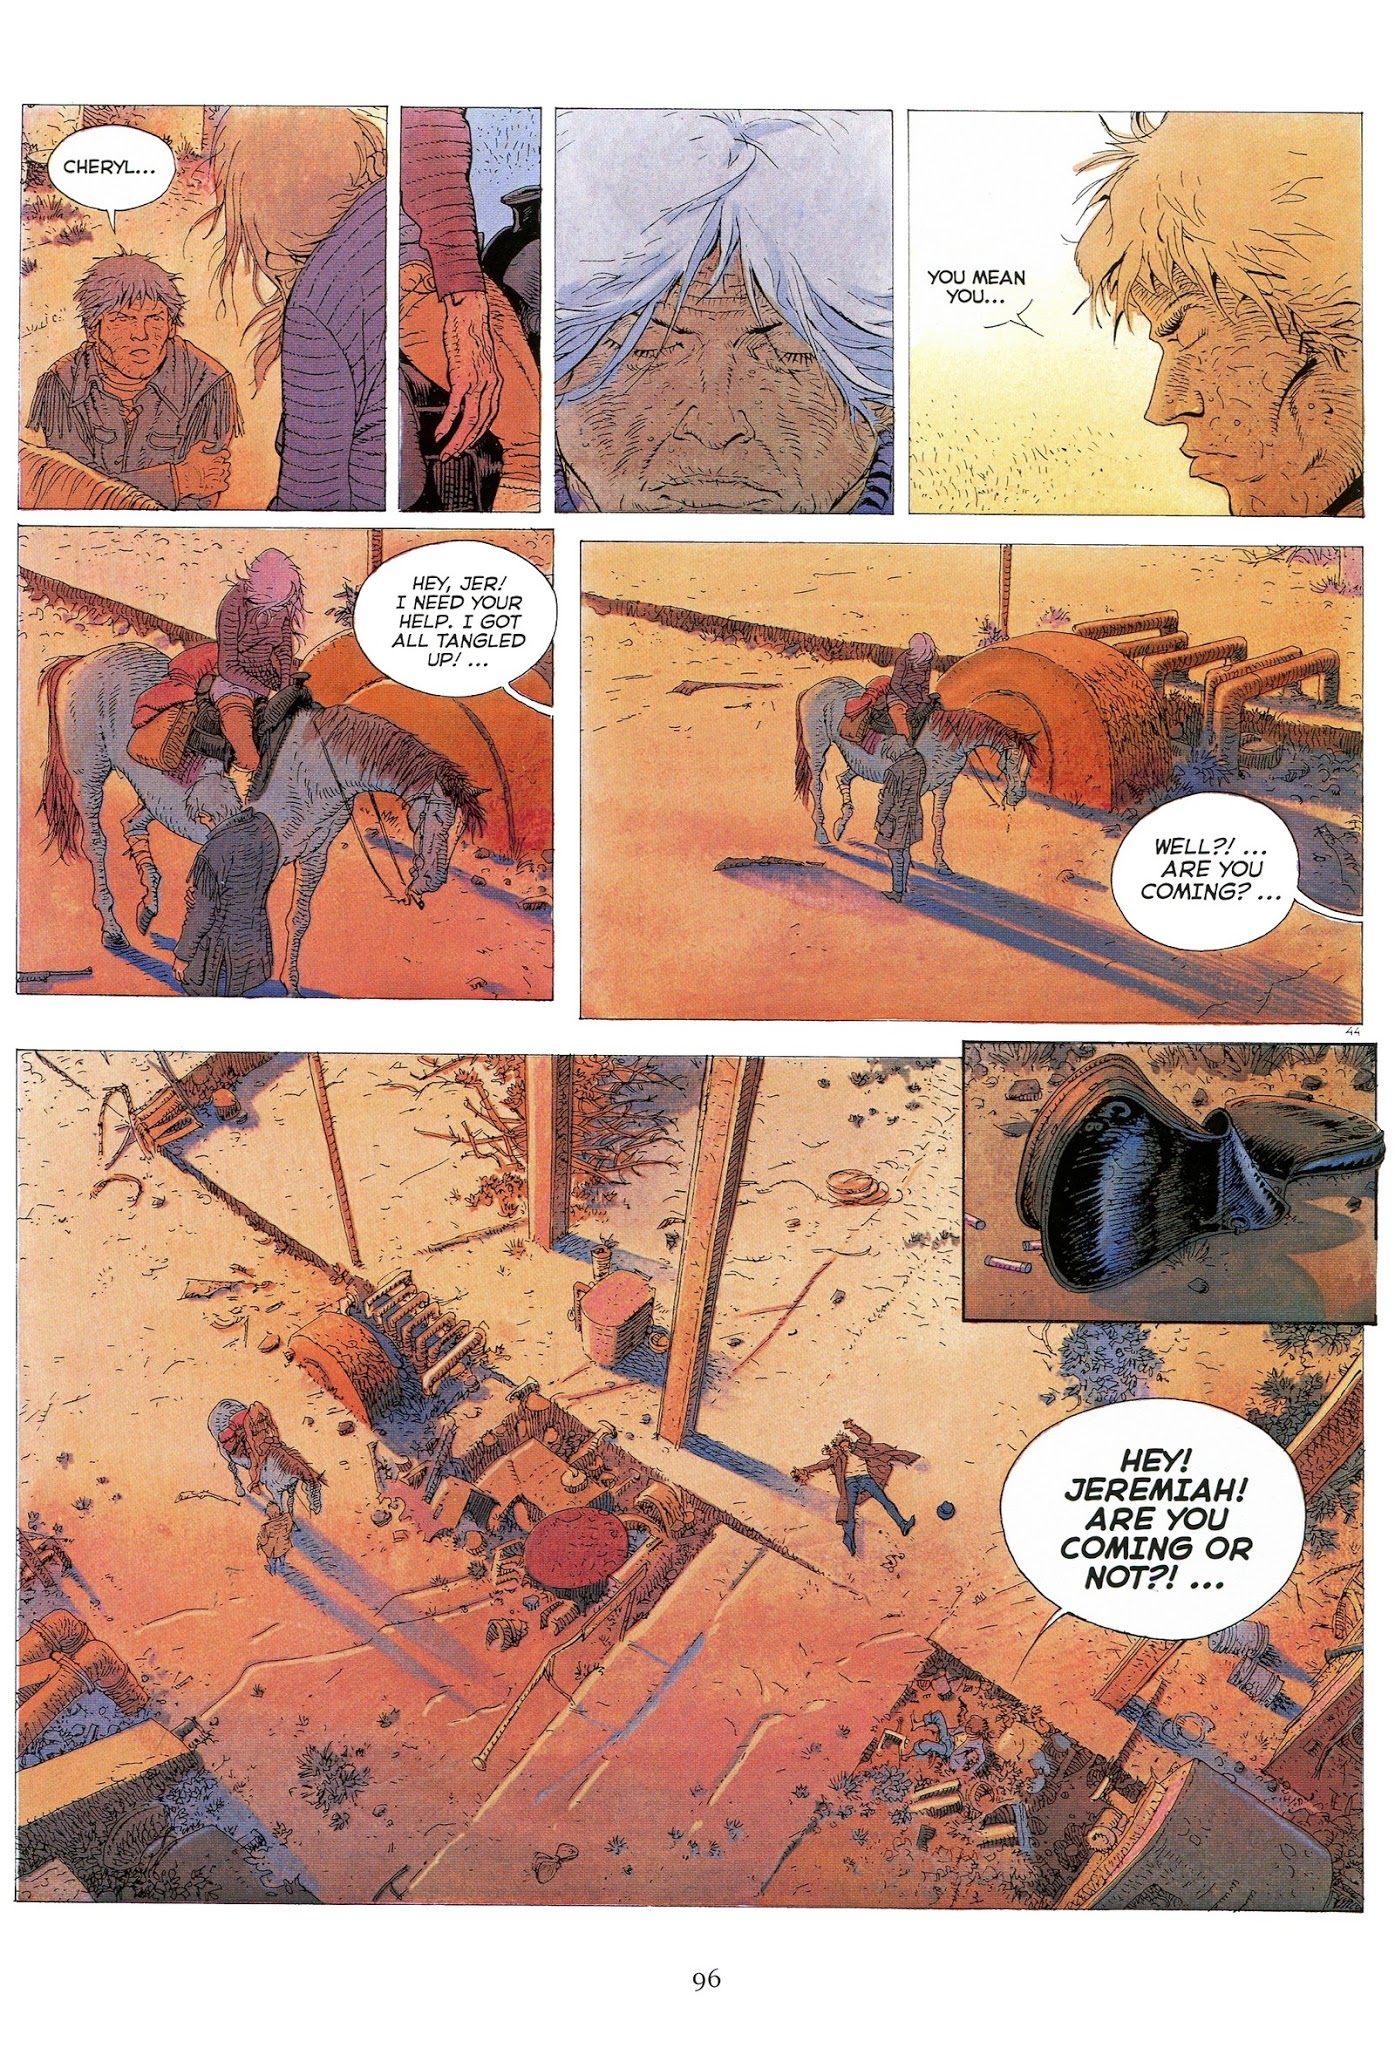 Read online Jeremiah by Hermann comic -  Issue # TPB 2 - 97